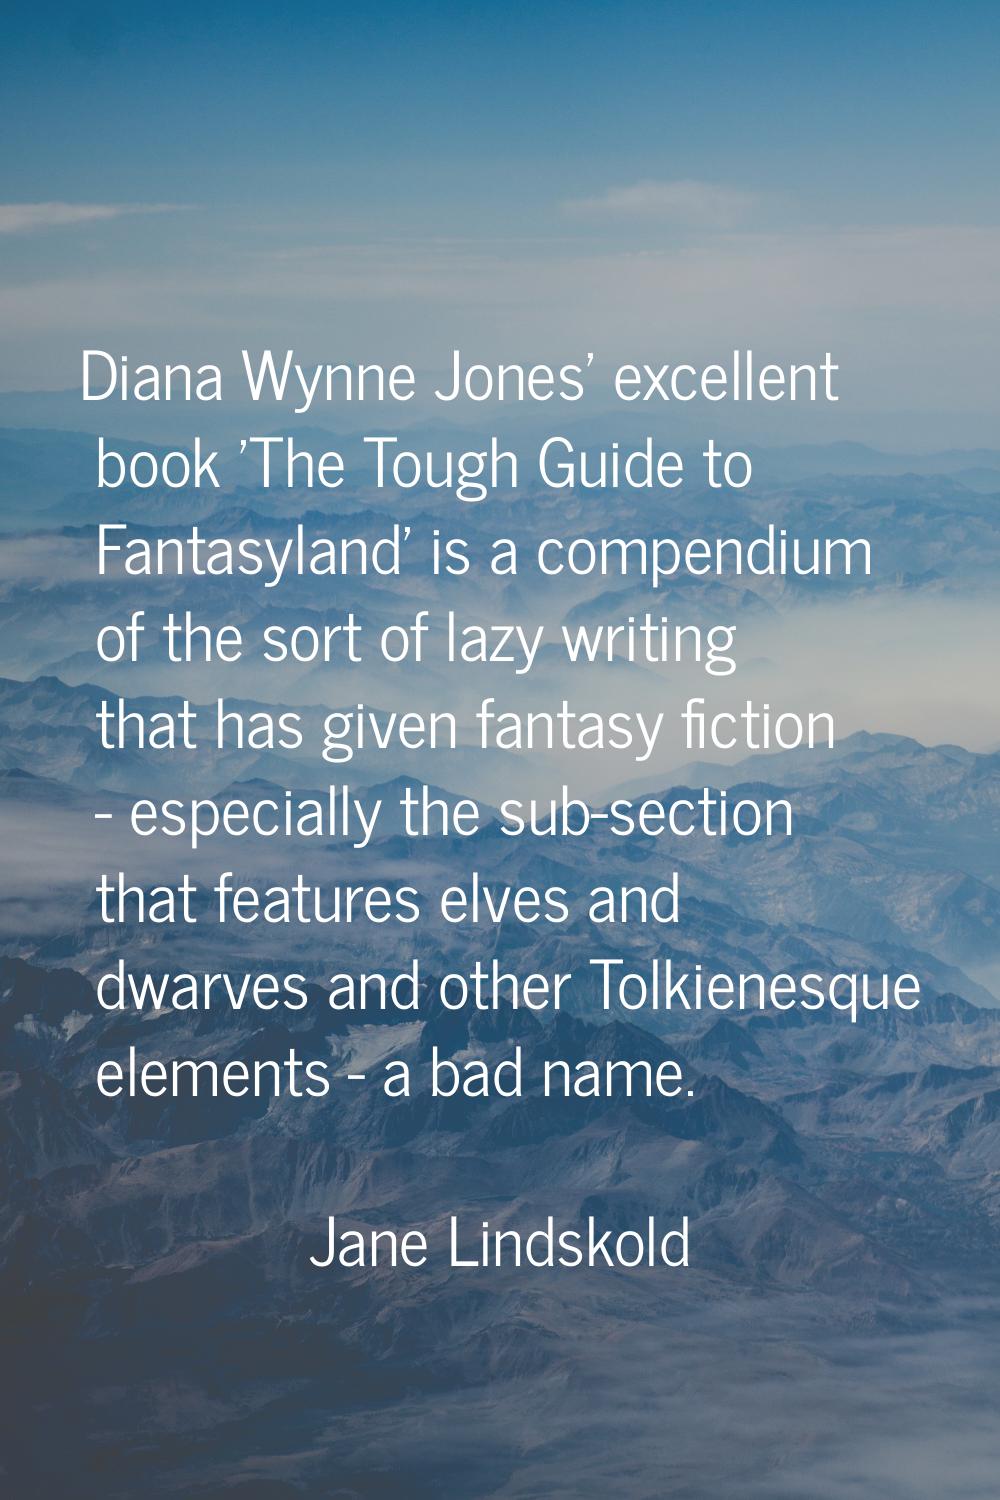 Diana Wynne Jones' excellent book 'The Tough Guide to Fantasyland' is a compendium of the sort of l